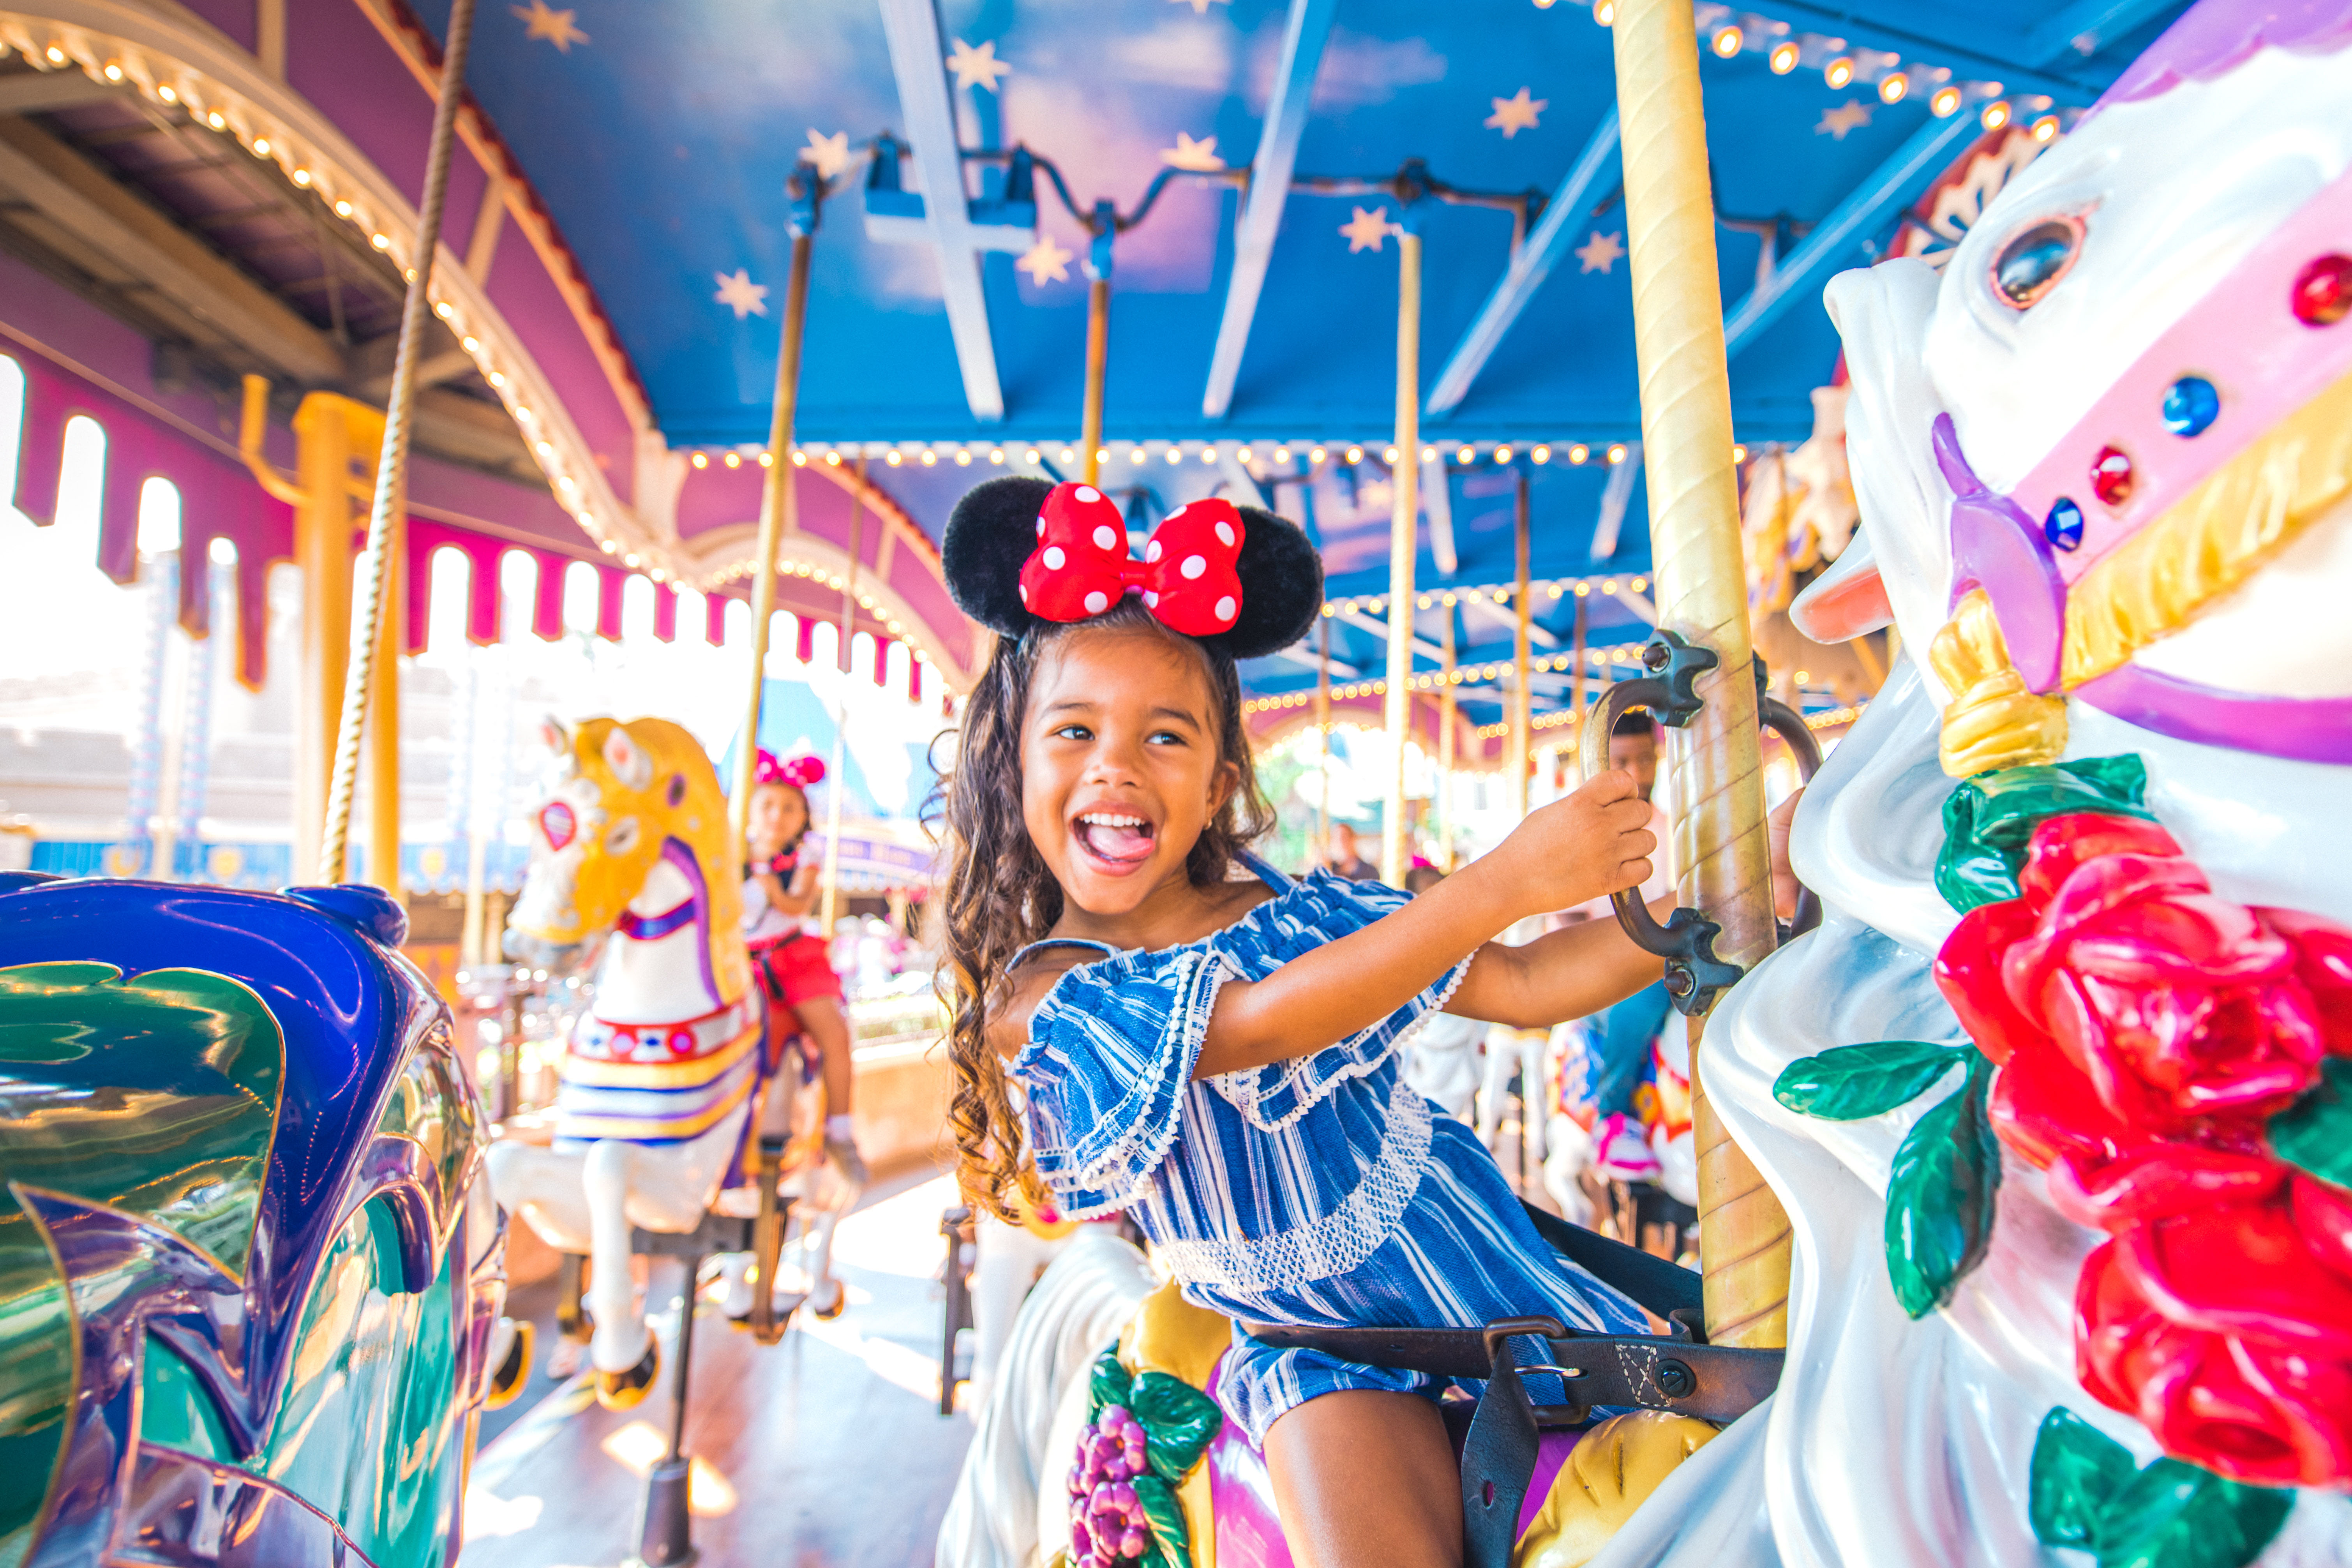 Adorable girl in Minnie Ears on carousel